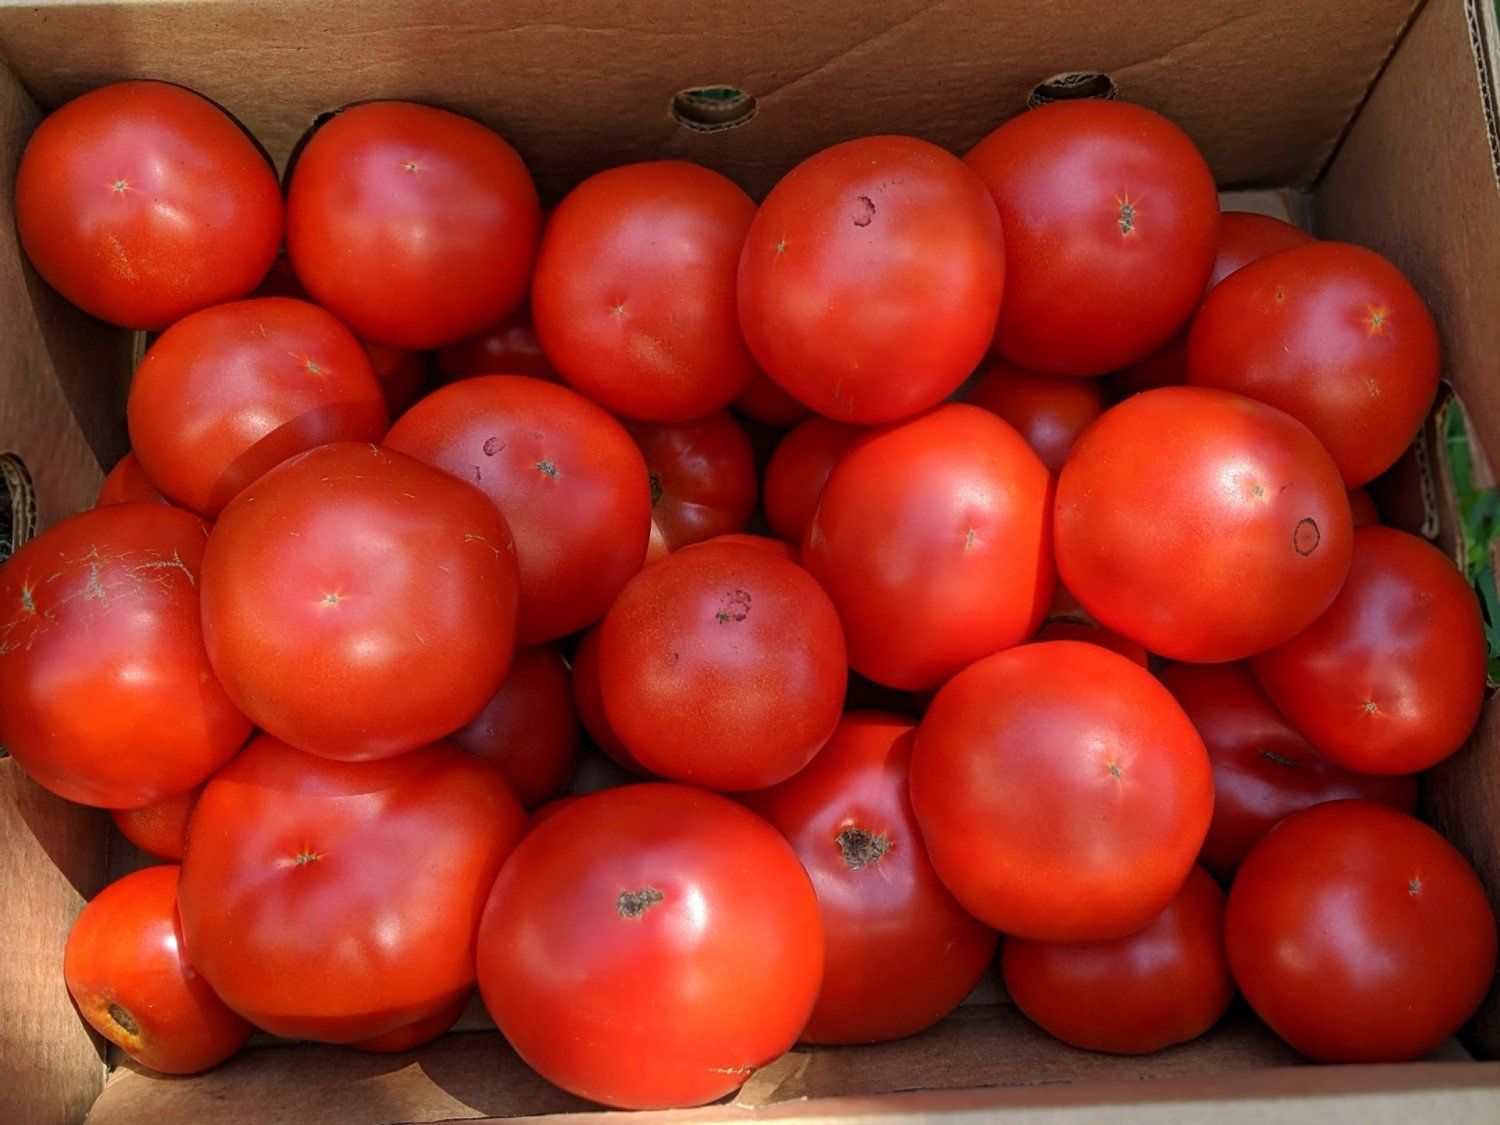 Next Happening: Customize your box for tomatoes.